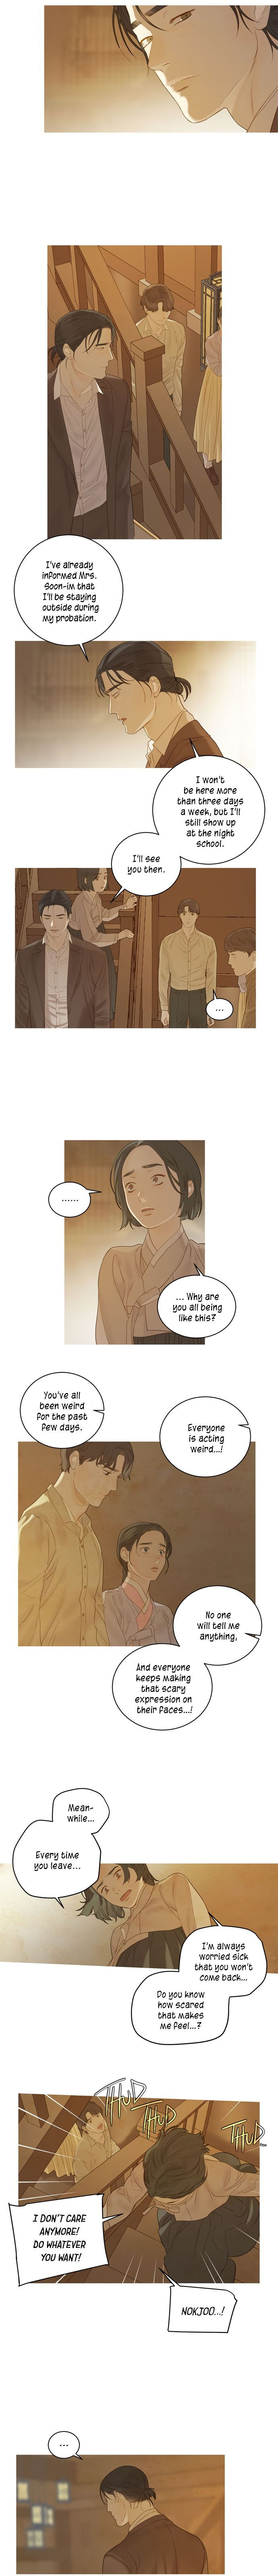 Gorae Byul - The Gyeongseong Mermaid - Chapter 26 Page 7